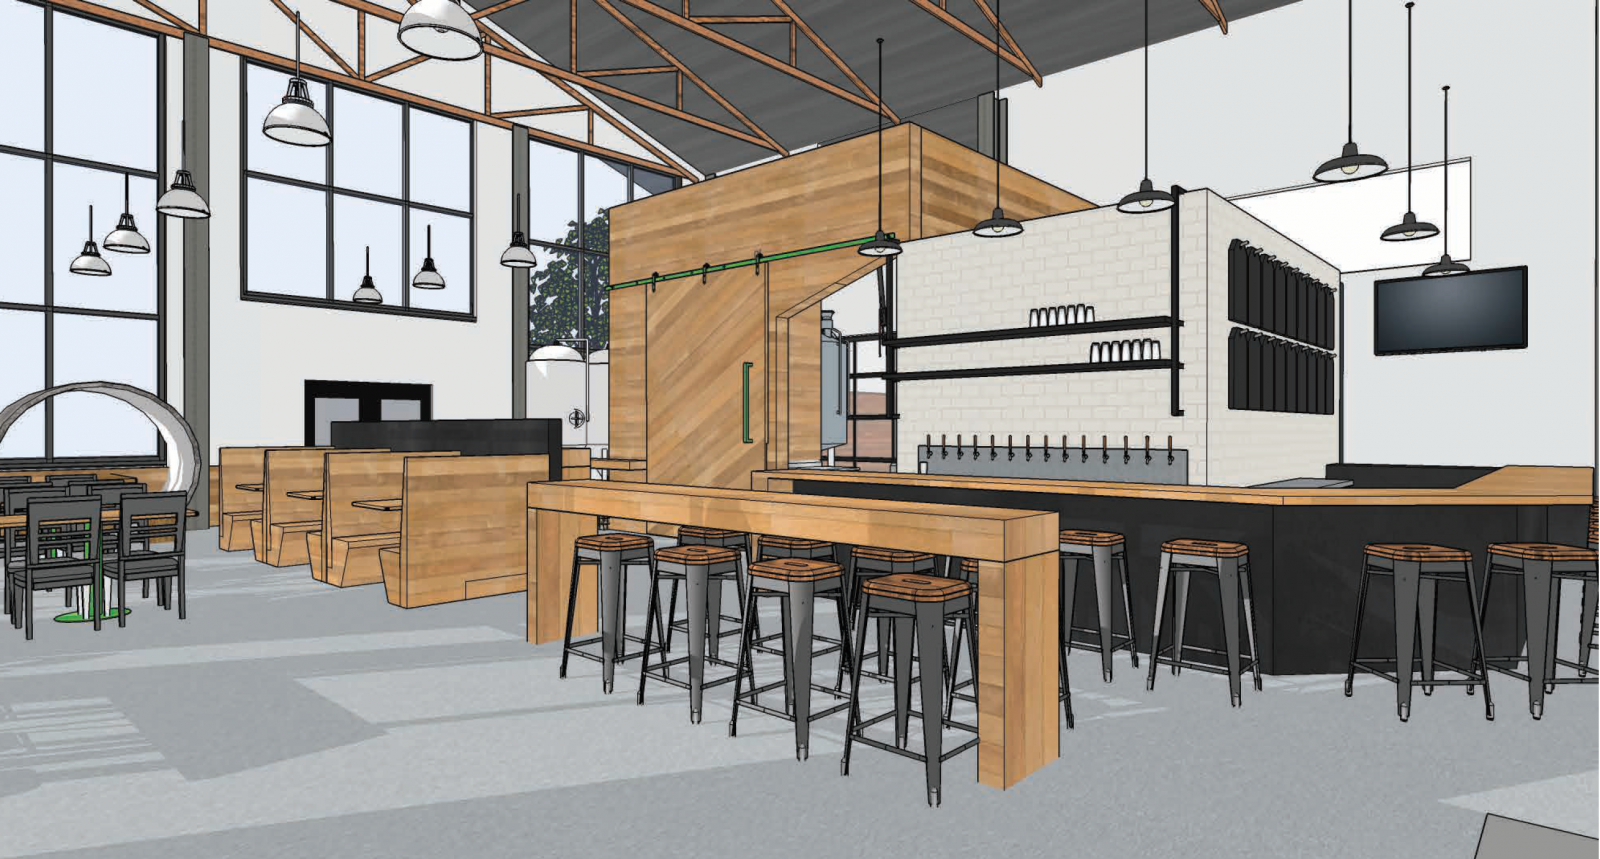 Trouvaille Brewing interior rendering